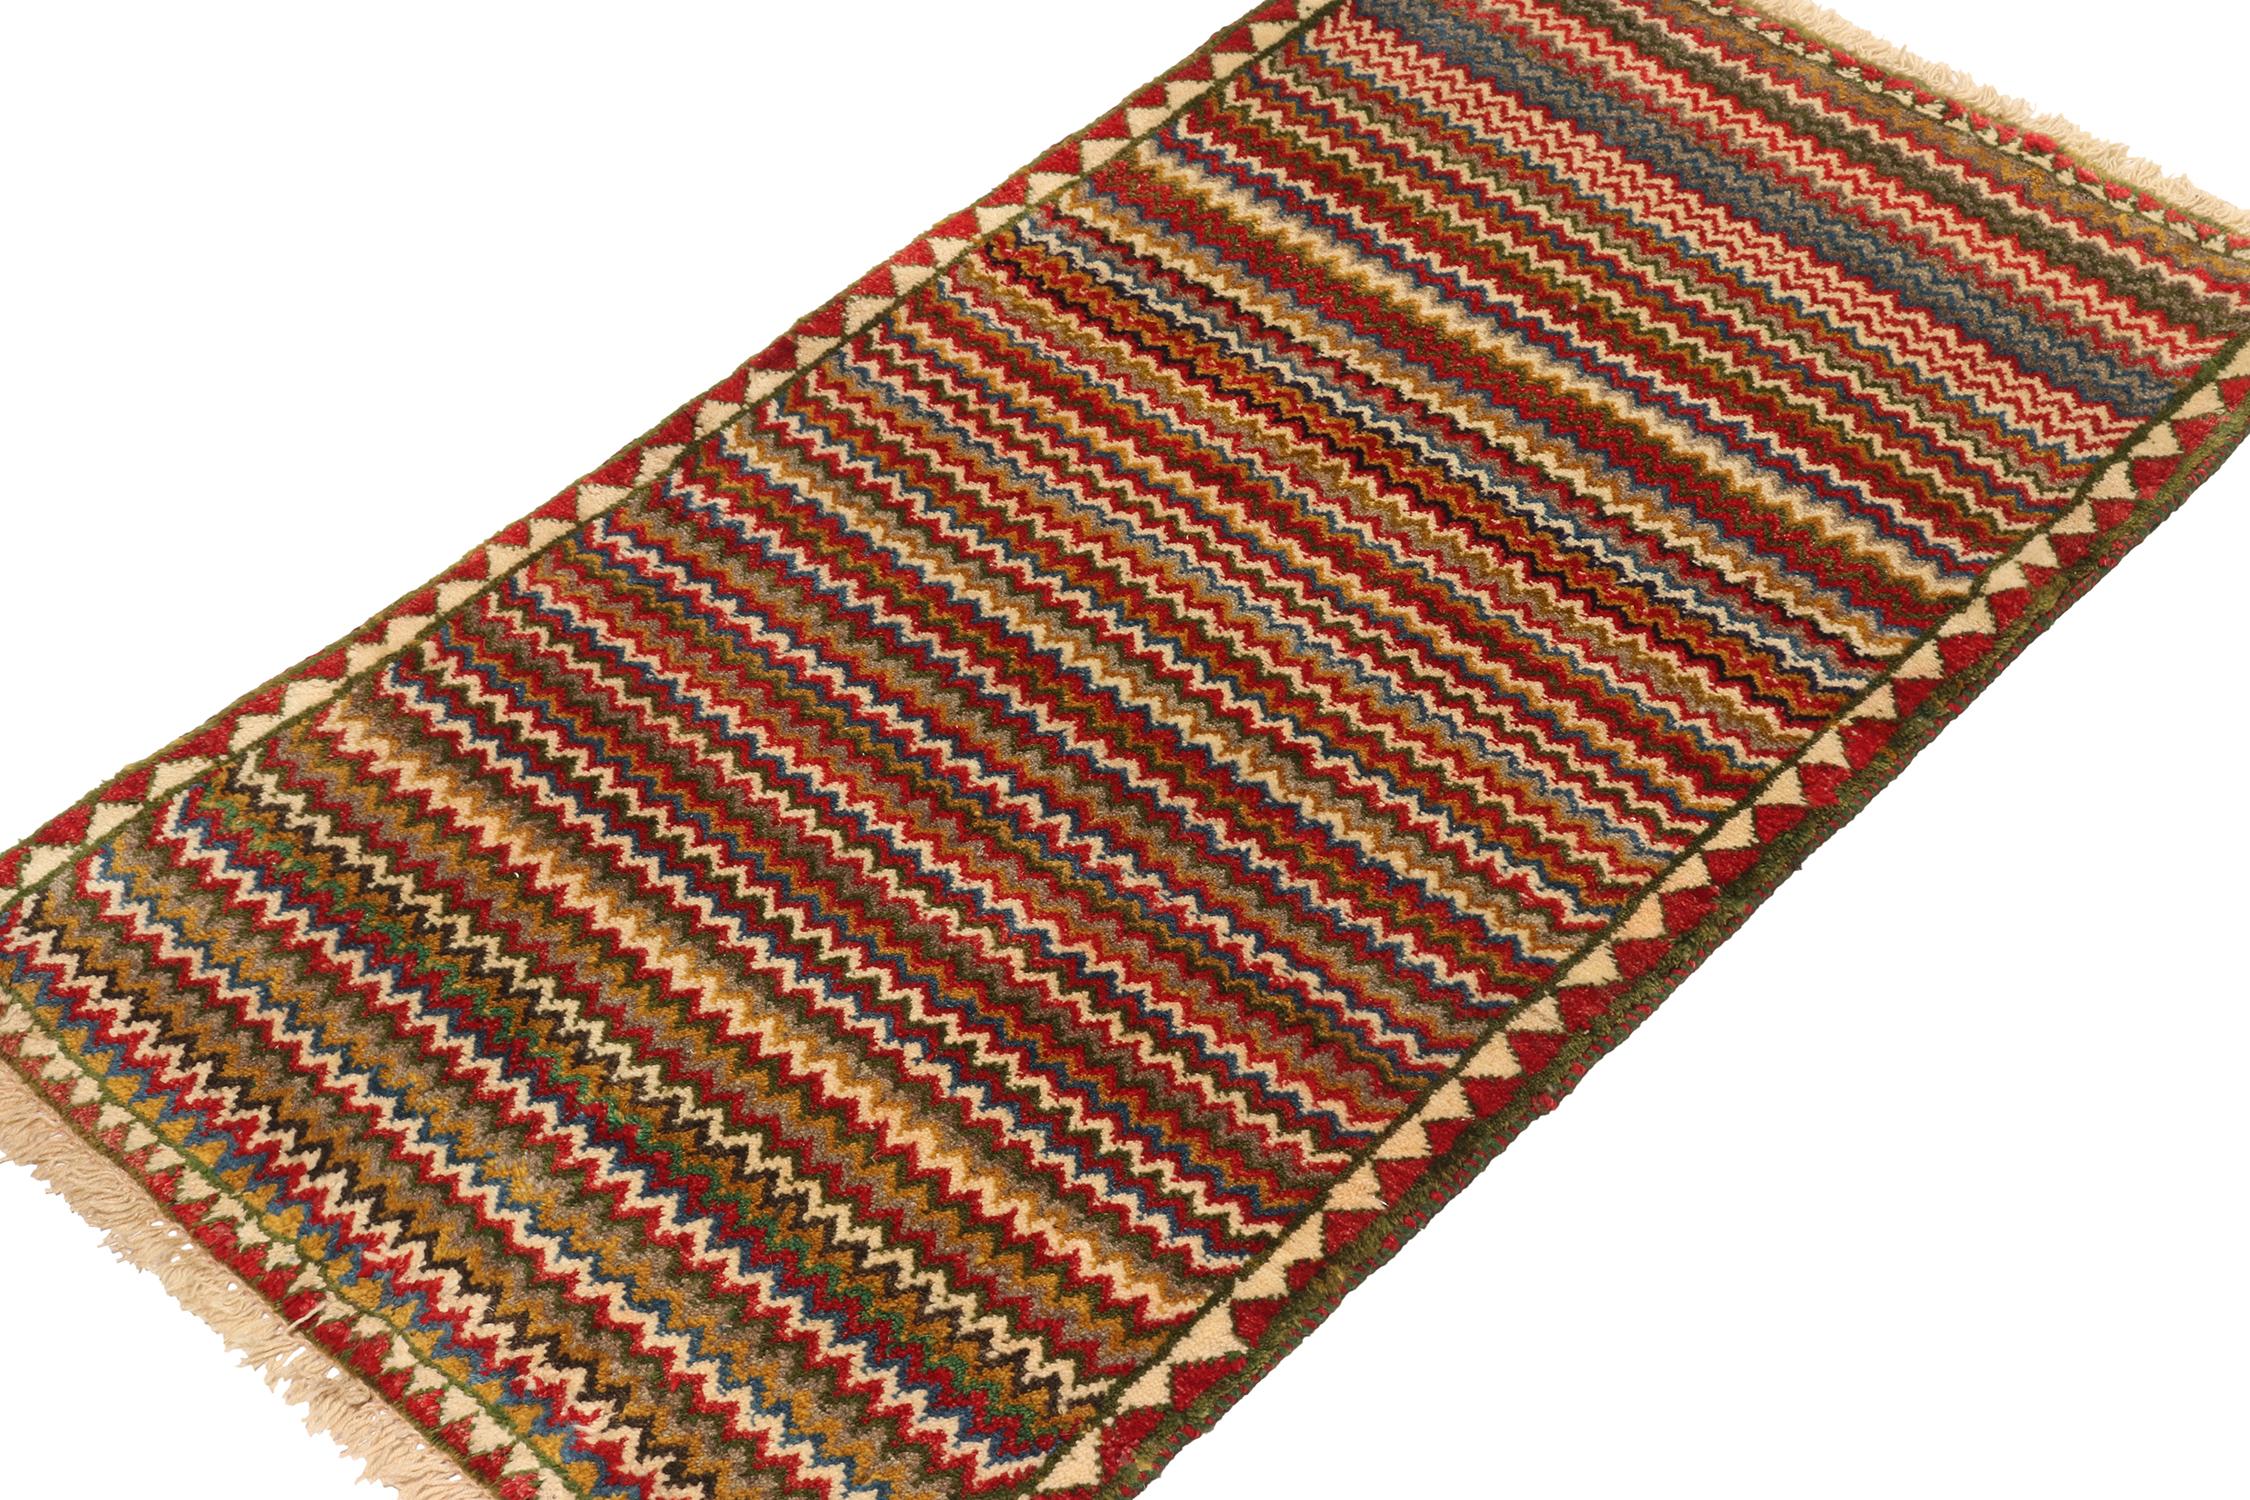 This vintage 2x4 Gabbeh Persian rug is from the latest entries in Rug & Kilim’s rare tribal curations. Hand-knotted in wool circa 1950-1960.

On the Design:

This tribal provenance is one of the most primitive, and collectible shabby-chic styles